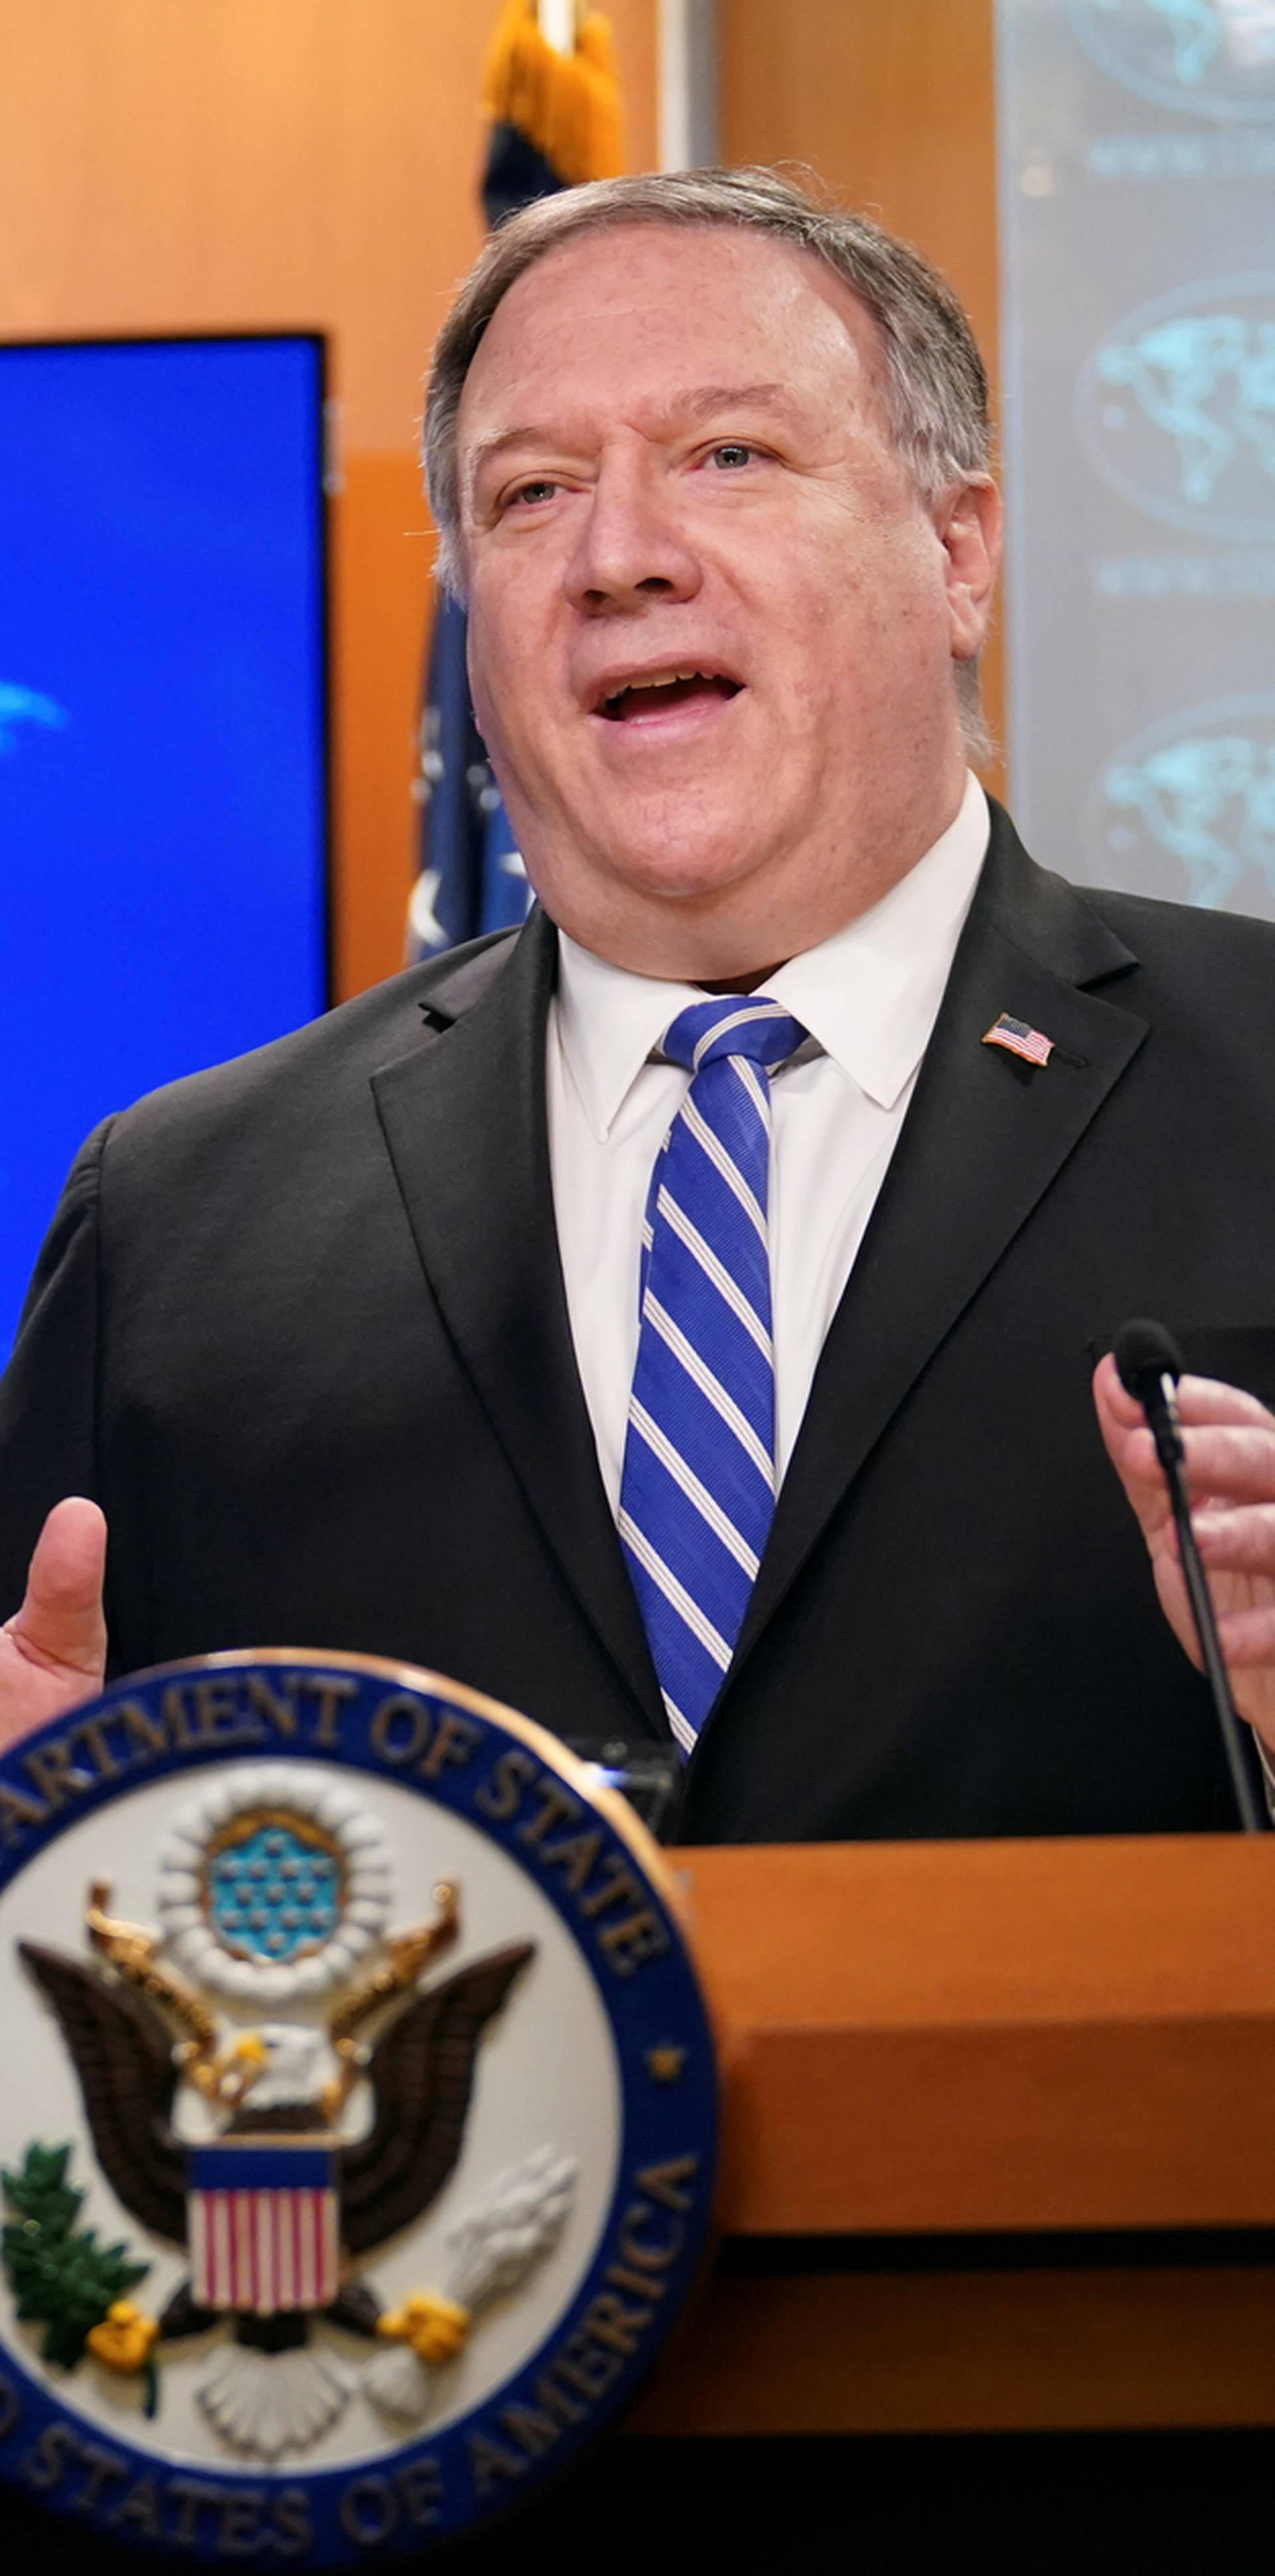 FILE PHOTO: U.S. Secretary of State Pompeo speaks to reporters during briefing at State Department in Washington